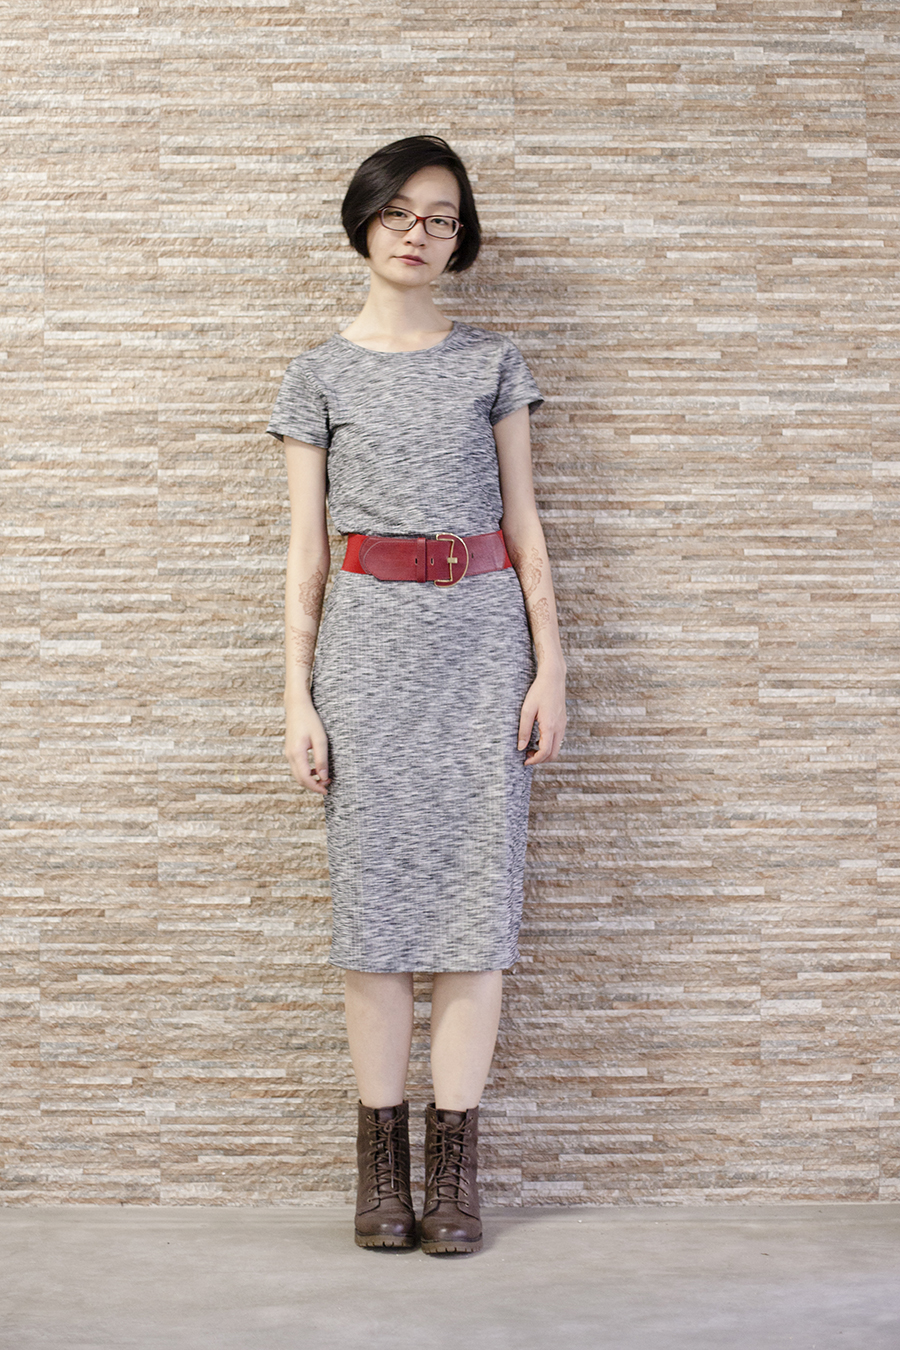 Cotton On heather grey bodycon midi dress, Steve Madden boots, Accessorize red belt, Firmoo glasses.